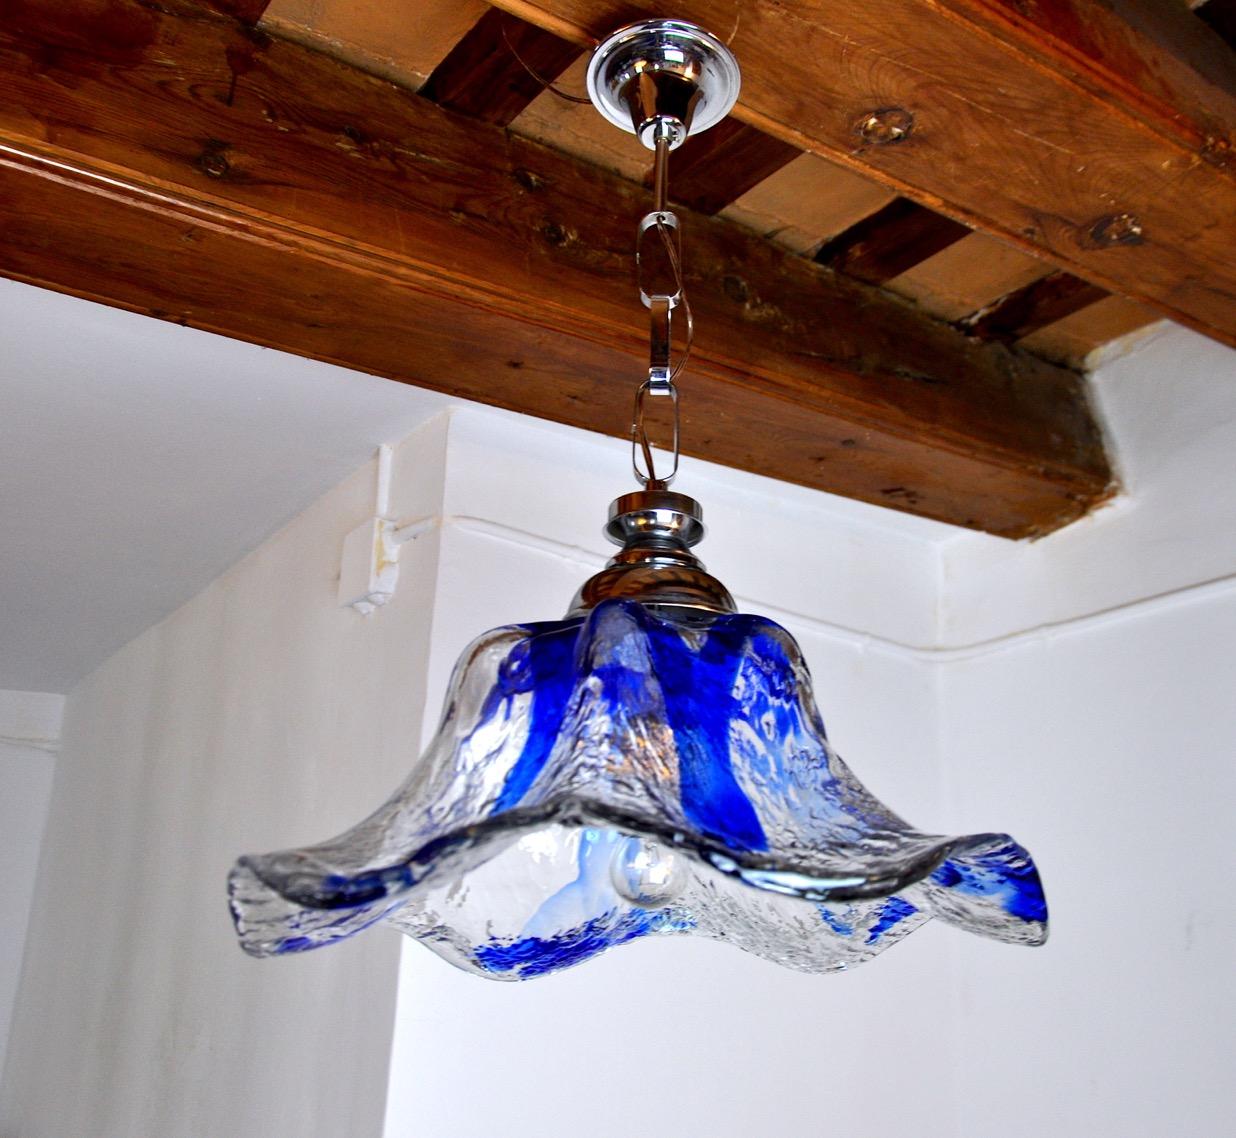 Superb and rare glass chandelier, flower shape, designed and produced by murano mazzega in italy in the 1970s. Rare design object that will illuminate your interior wonderfully. Electricity checked, very good state of conservation consistent with